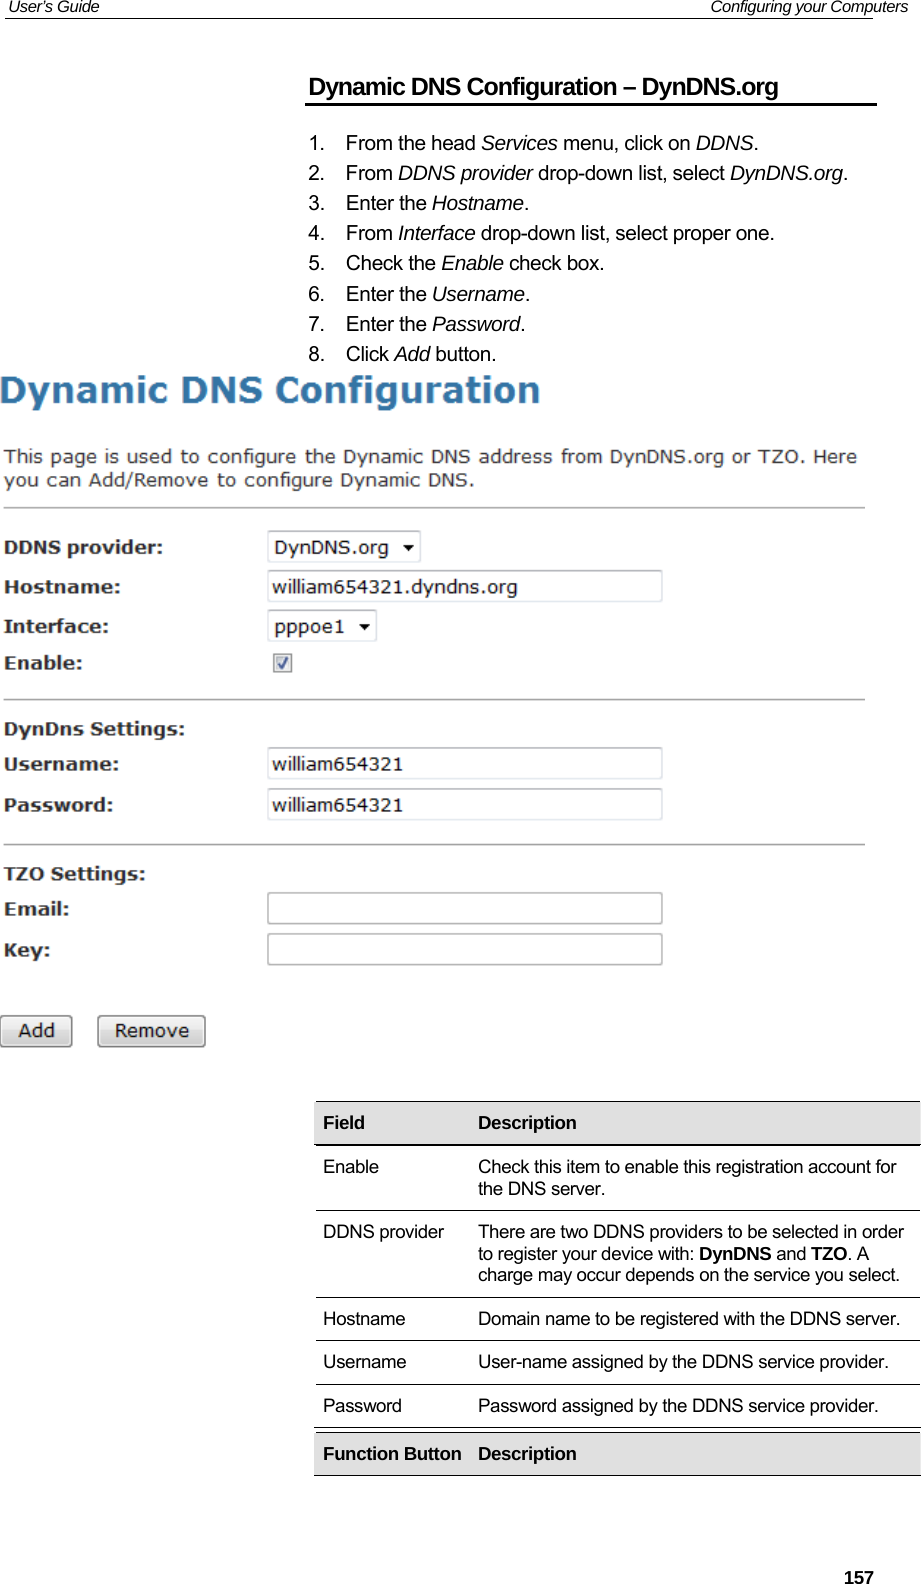 User’s Guide   Configuring your Computers Dynamic DNS Configuration – DynDNS.org 1. From the head Services menu, click on DDNS. 2. From DDNS provider drop-down list, select DynDNS.org. own list, select proper one.  box. 6. Enter the Username. 7. Enter the Password. 8. Click Add button. 3. Enter the Hostname. 4. From Interface drop-d5. Check the Enable check        Field  Description Enable  Check this item to enable this registration account for the DNS server. DDNS prov  ider to register your device with: DynDNS and TZO. A  There are two DDNS providers to be selected in order charge may occur depends on the service you select.Hostname  Domain name to be registered with the DDNS serve   r. Username  User-name assigned by the DDNS service provider.  Password  Password assigned by the DDNS service provider. Function Button Description  157